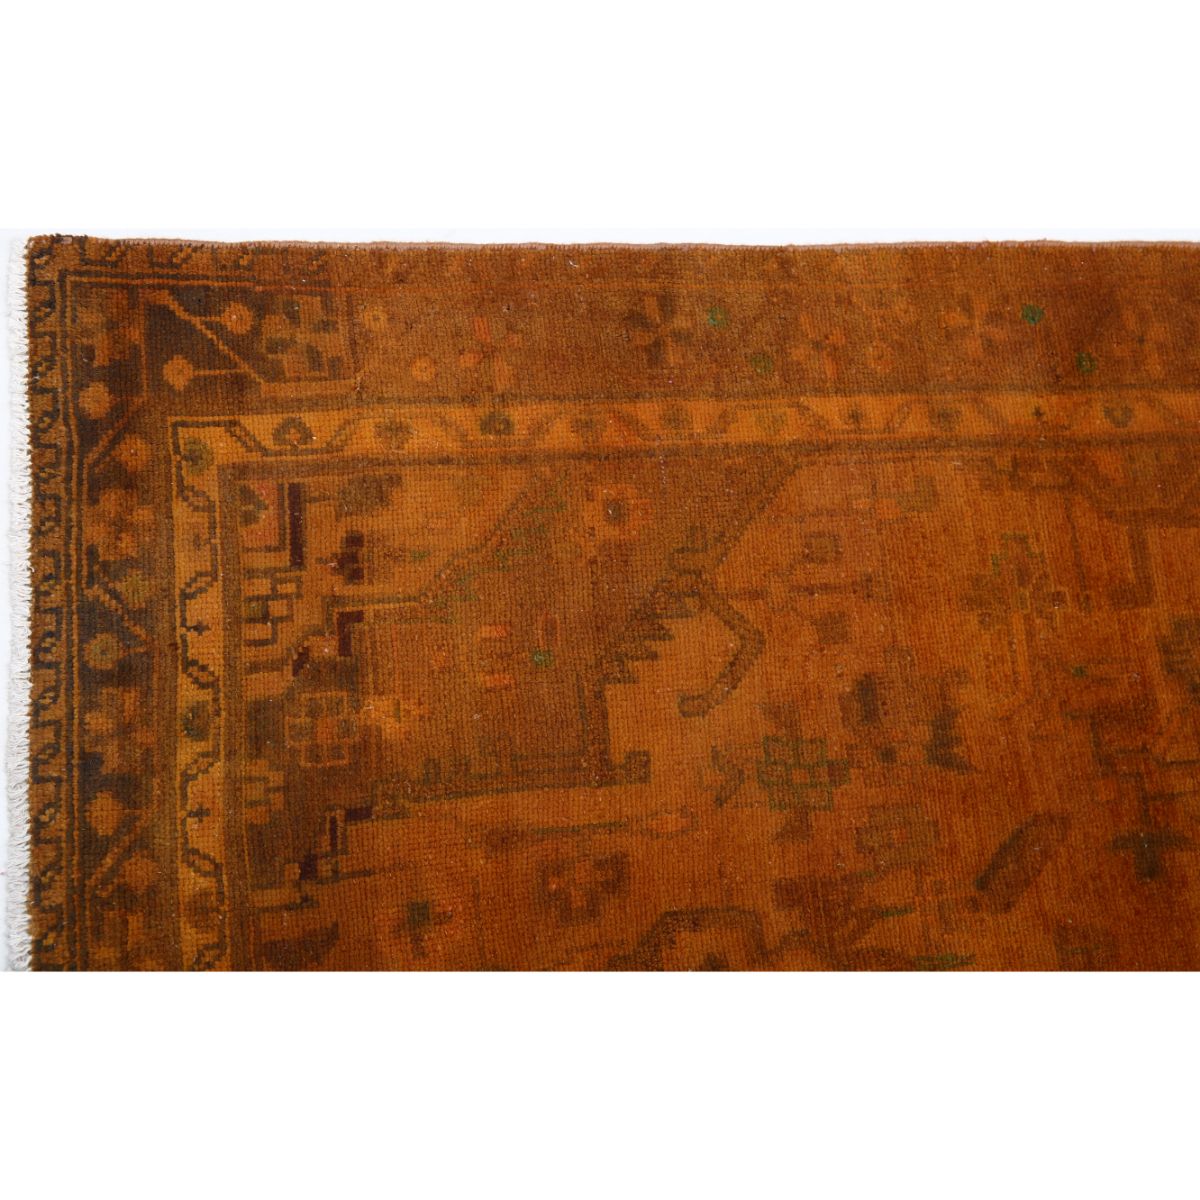 OverDye 3'9" X 9'10" Wool Hand-Knotted Rug